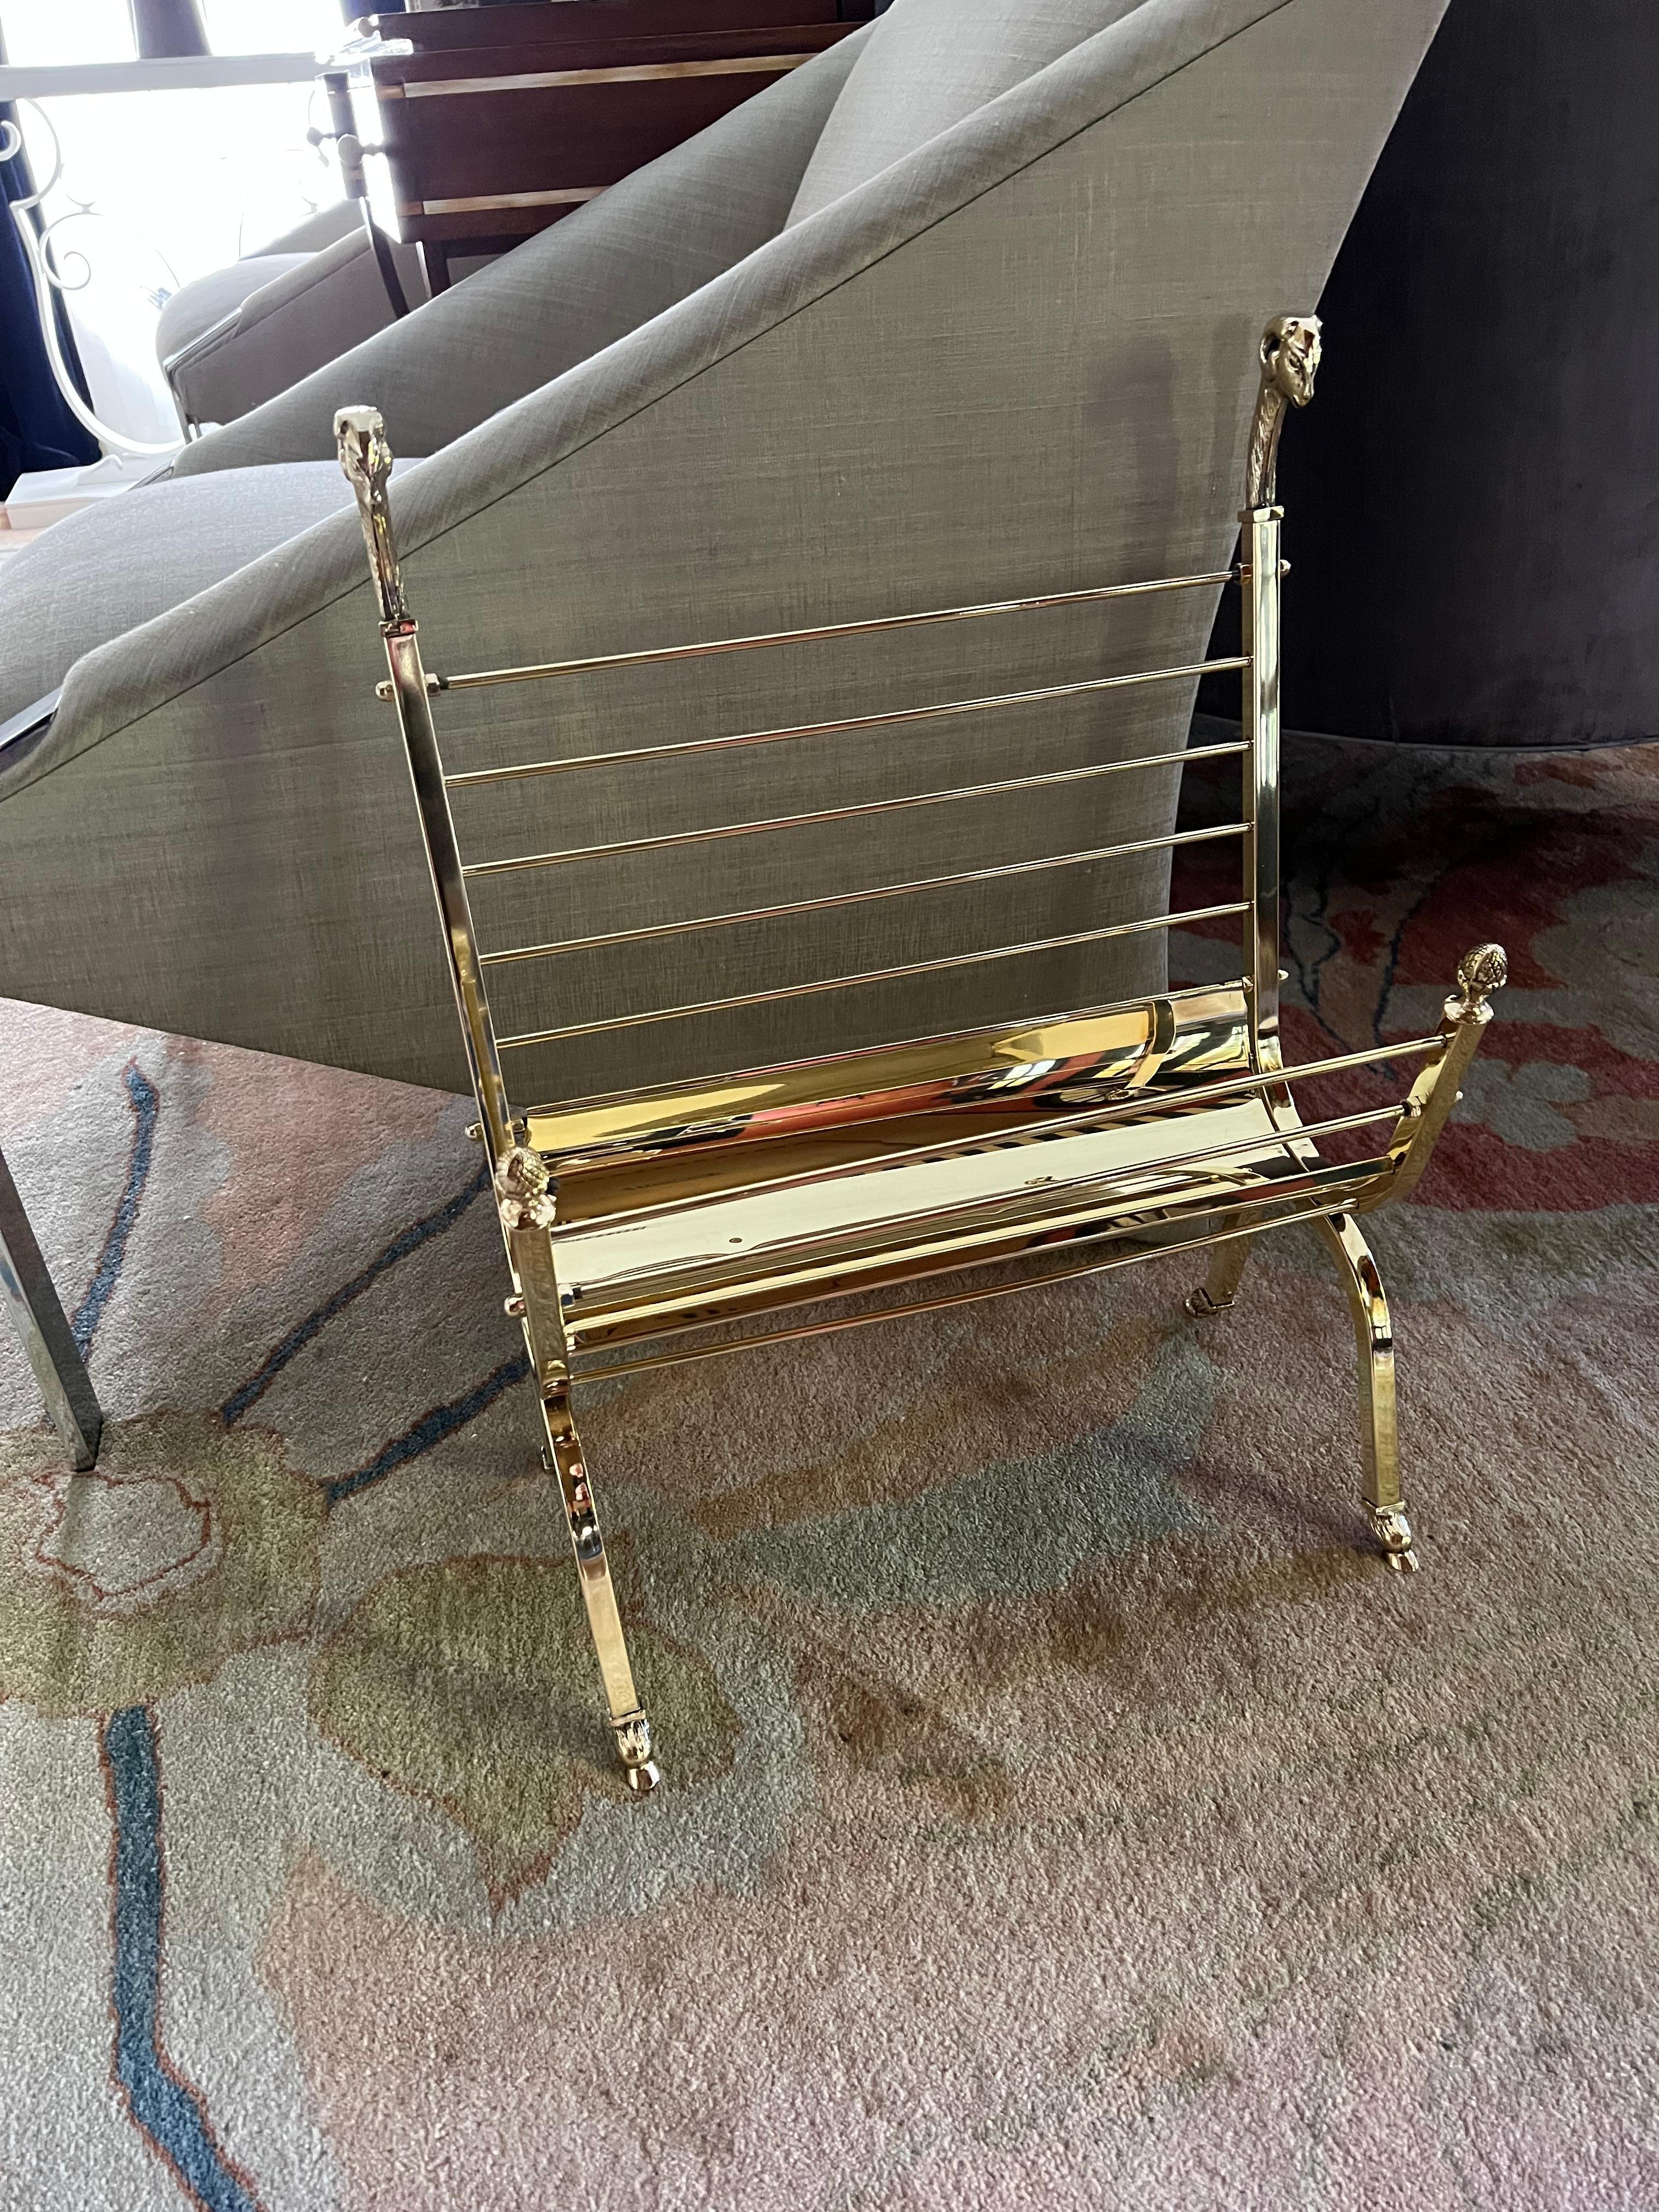 A wonderful brass magazine rack attributed to  Maison Jansen. The rams heads and feet, in true Maison Jansen style set this piece apart. A compliment to any room. The professionally polished brass reveals a truly spectacular shine.